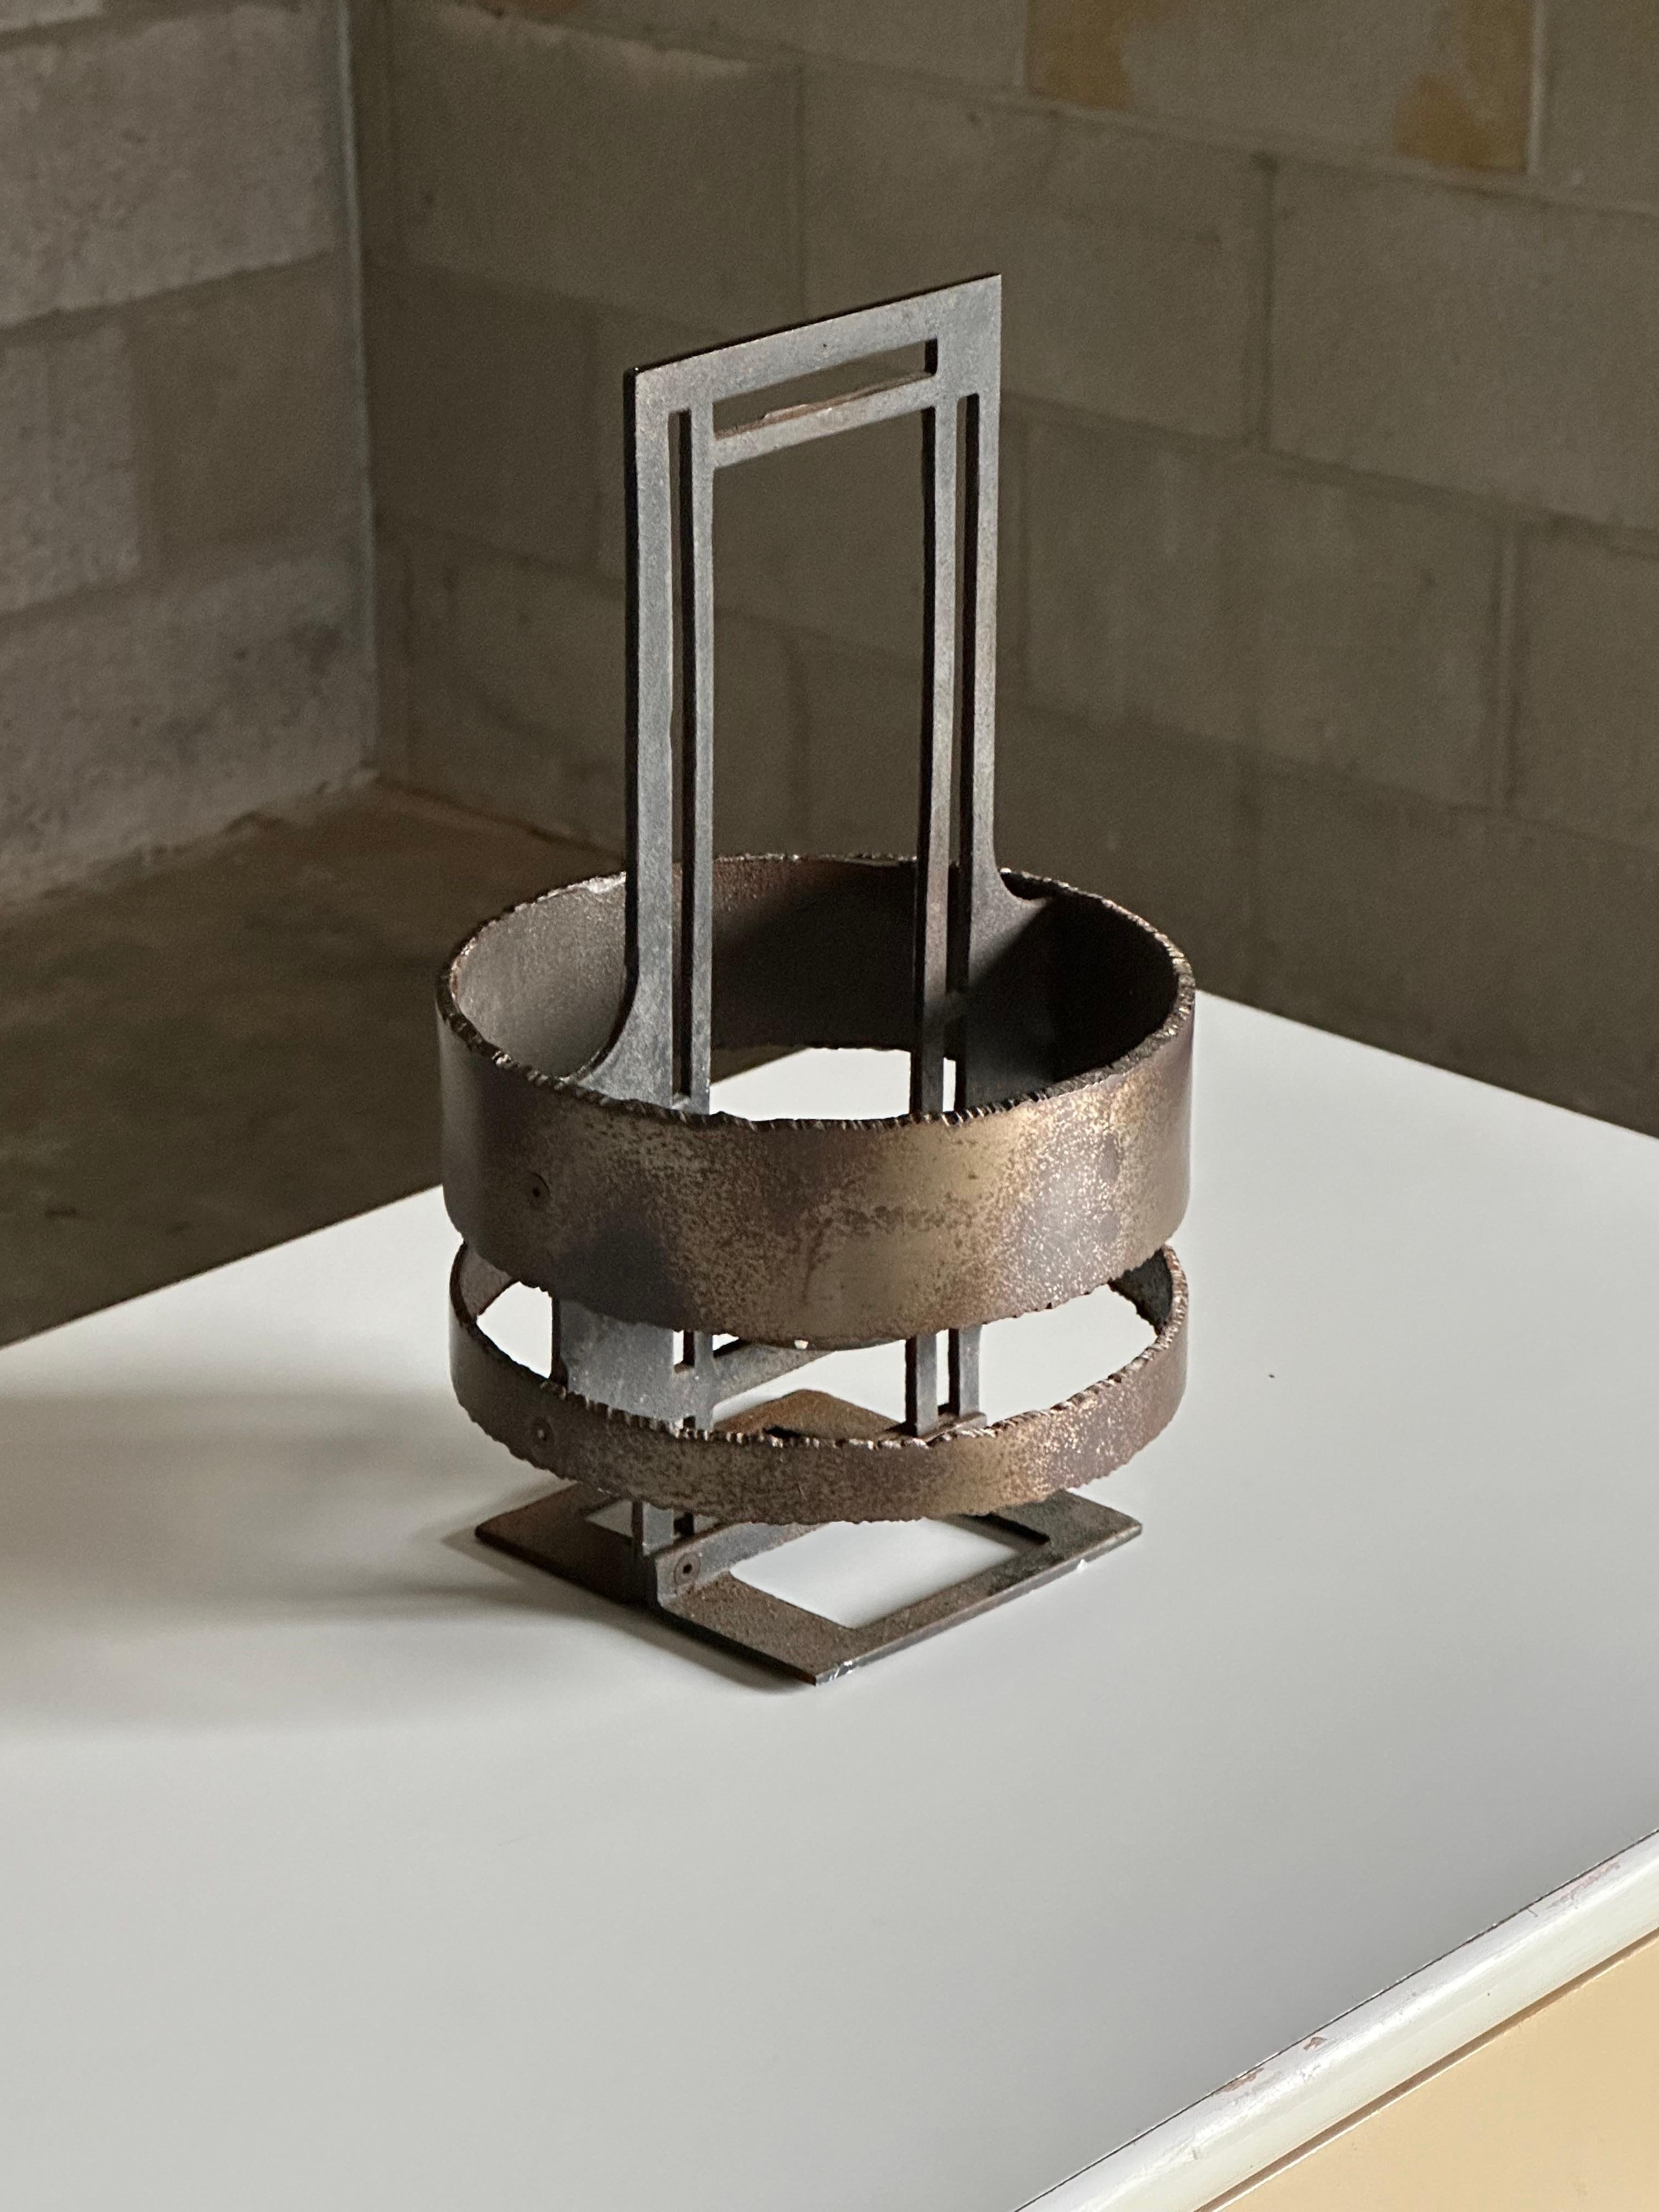 A rare freestanding Patinated iron and steel candle holder by Poul Havgaard with heavy brutalist influence. Features two steel rings on the outside and an iron frame. Marked on interior “Havgaard Danmark”

Matching pair of hanging versions of these